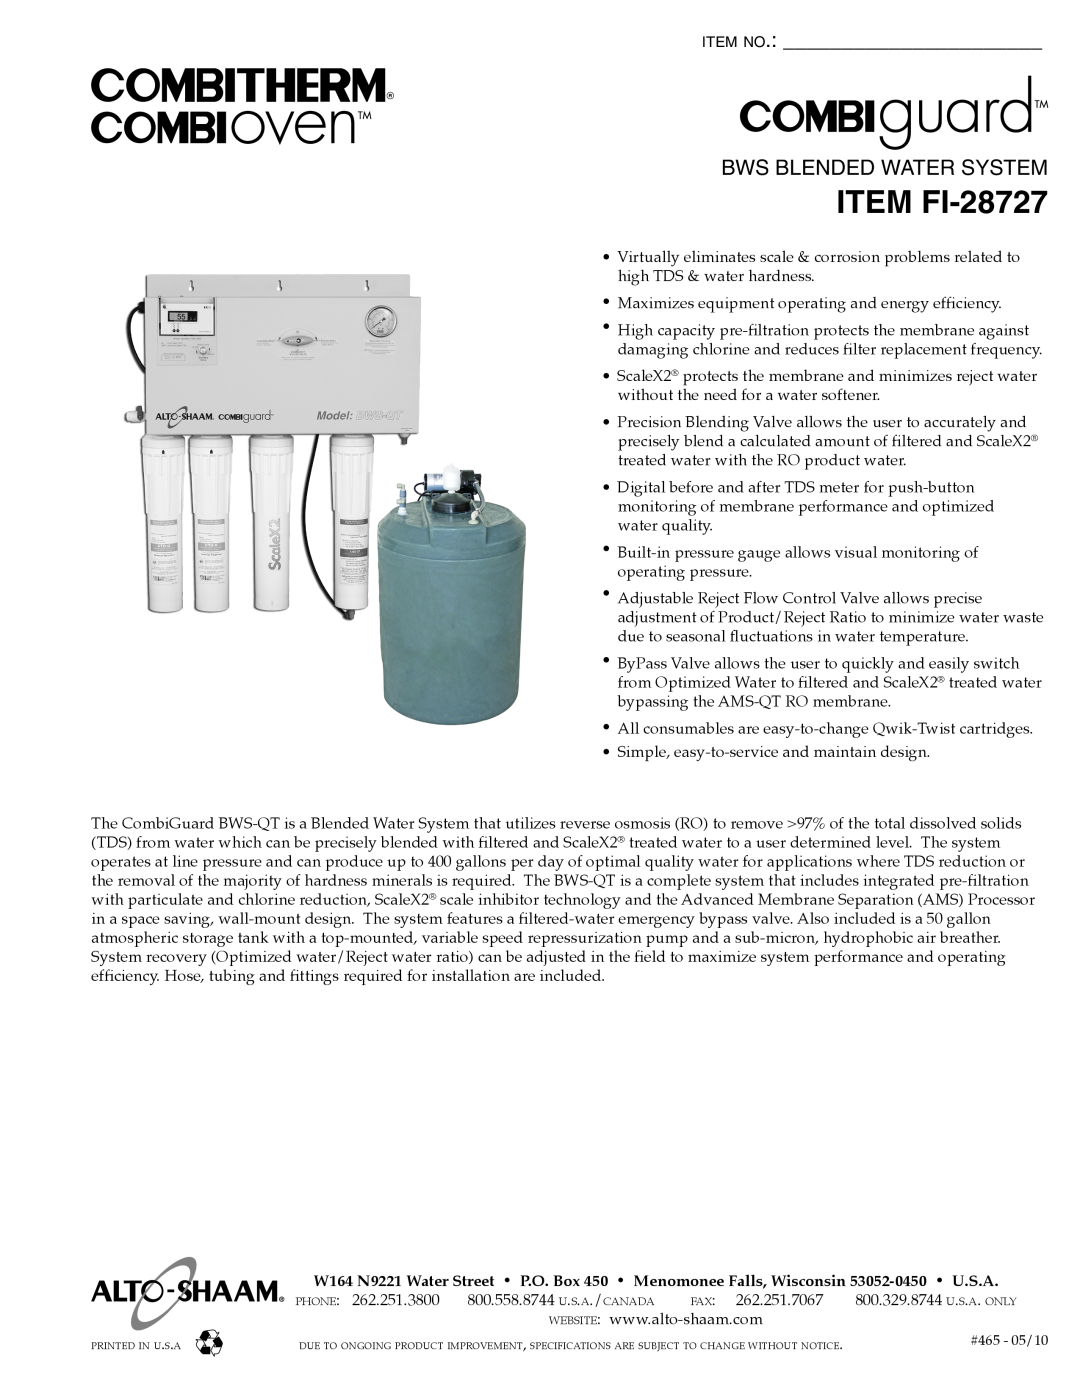 Alto-Shaam specifications ITEM FI-28727, item no BWS BLENDED WATER SYSTEM 